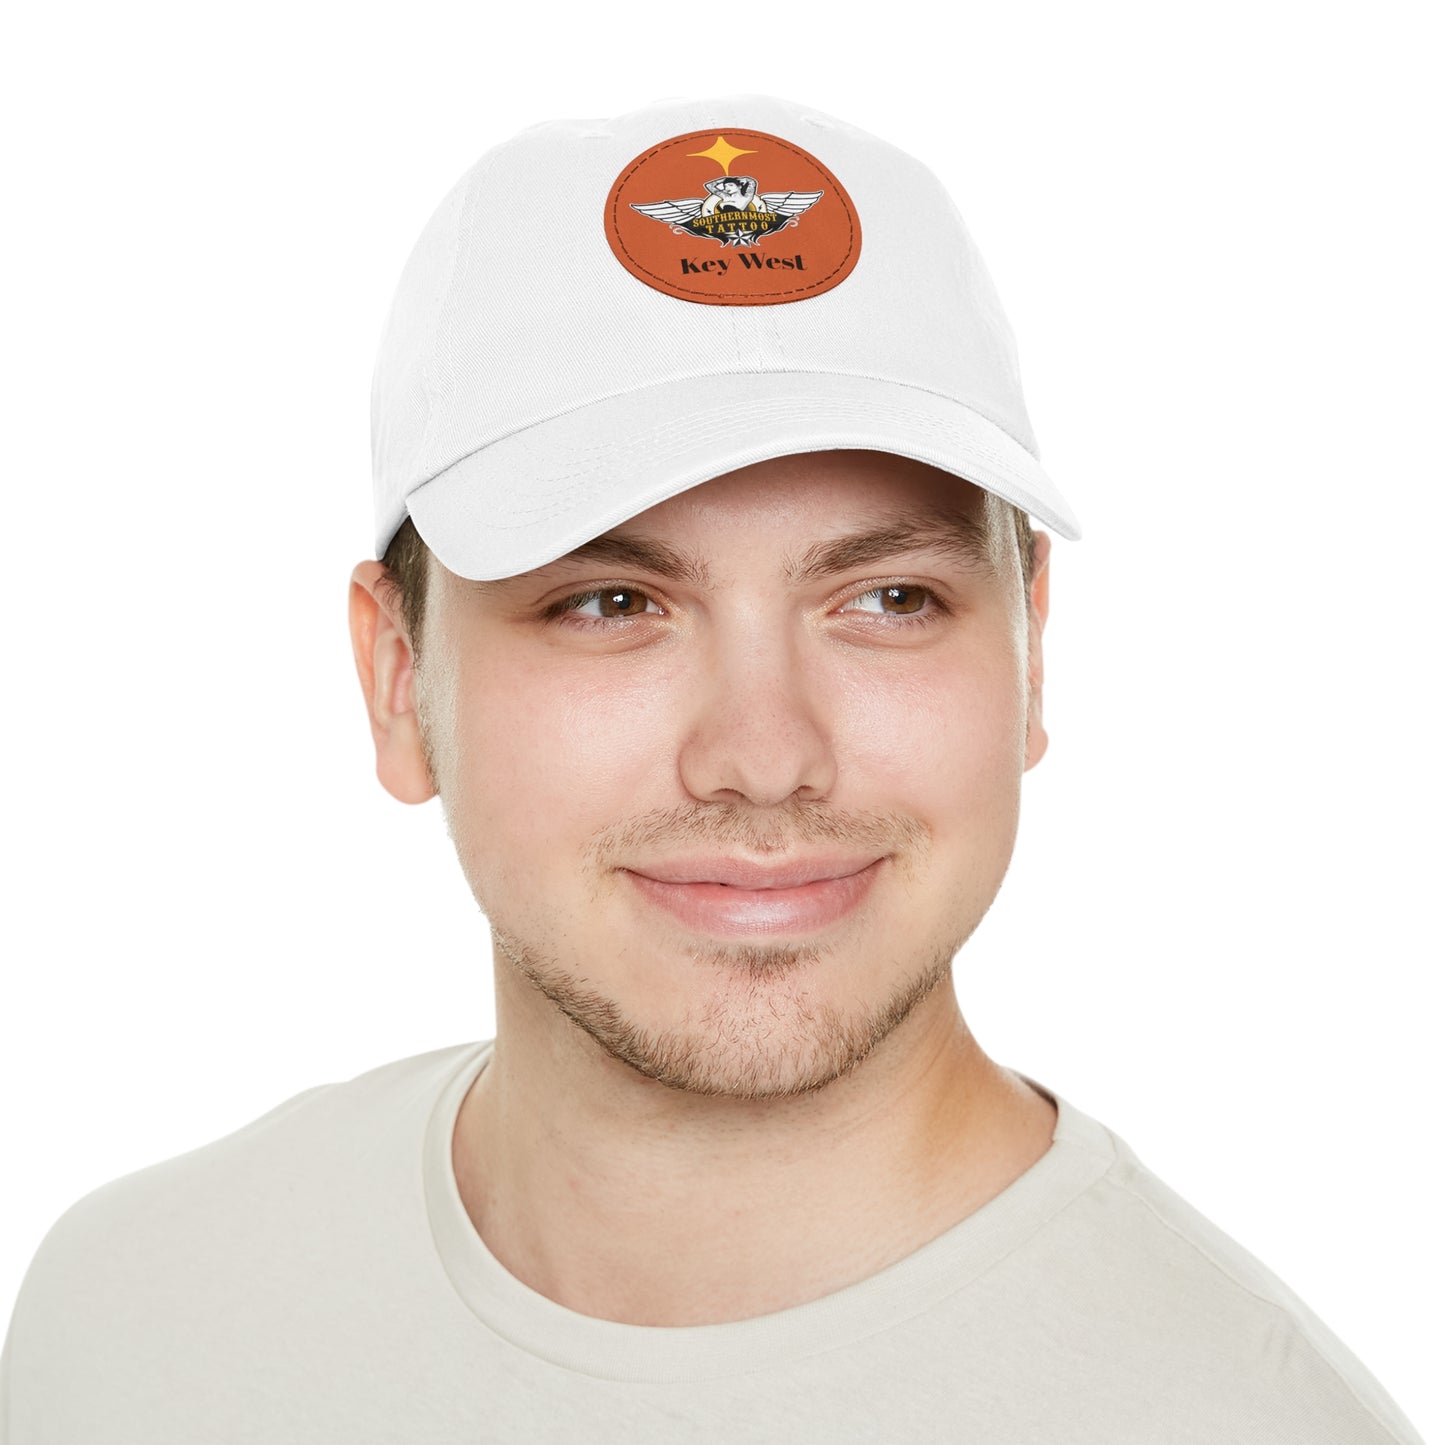 Southernmost Tattoo Hat with Leather Patch (Round)